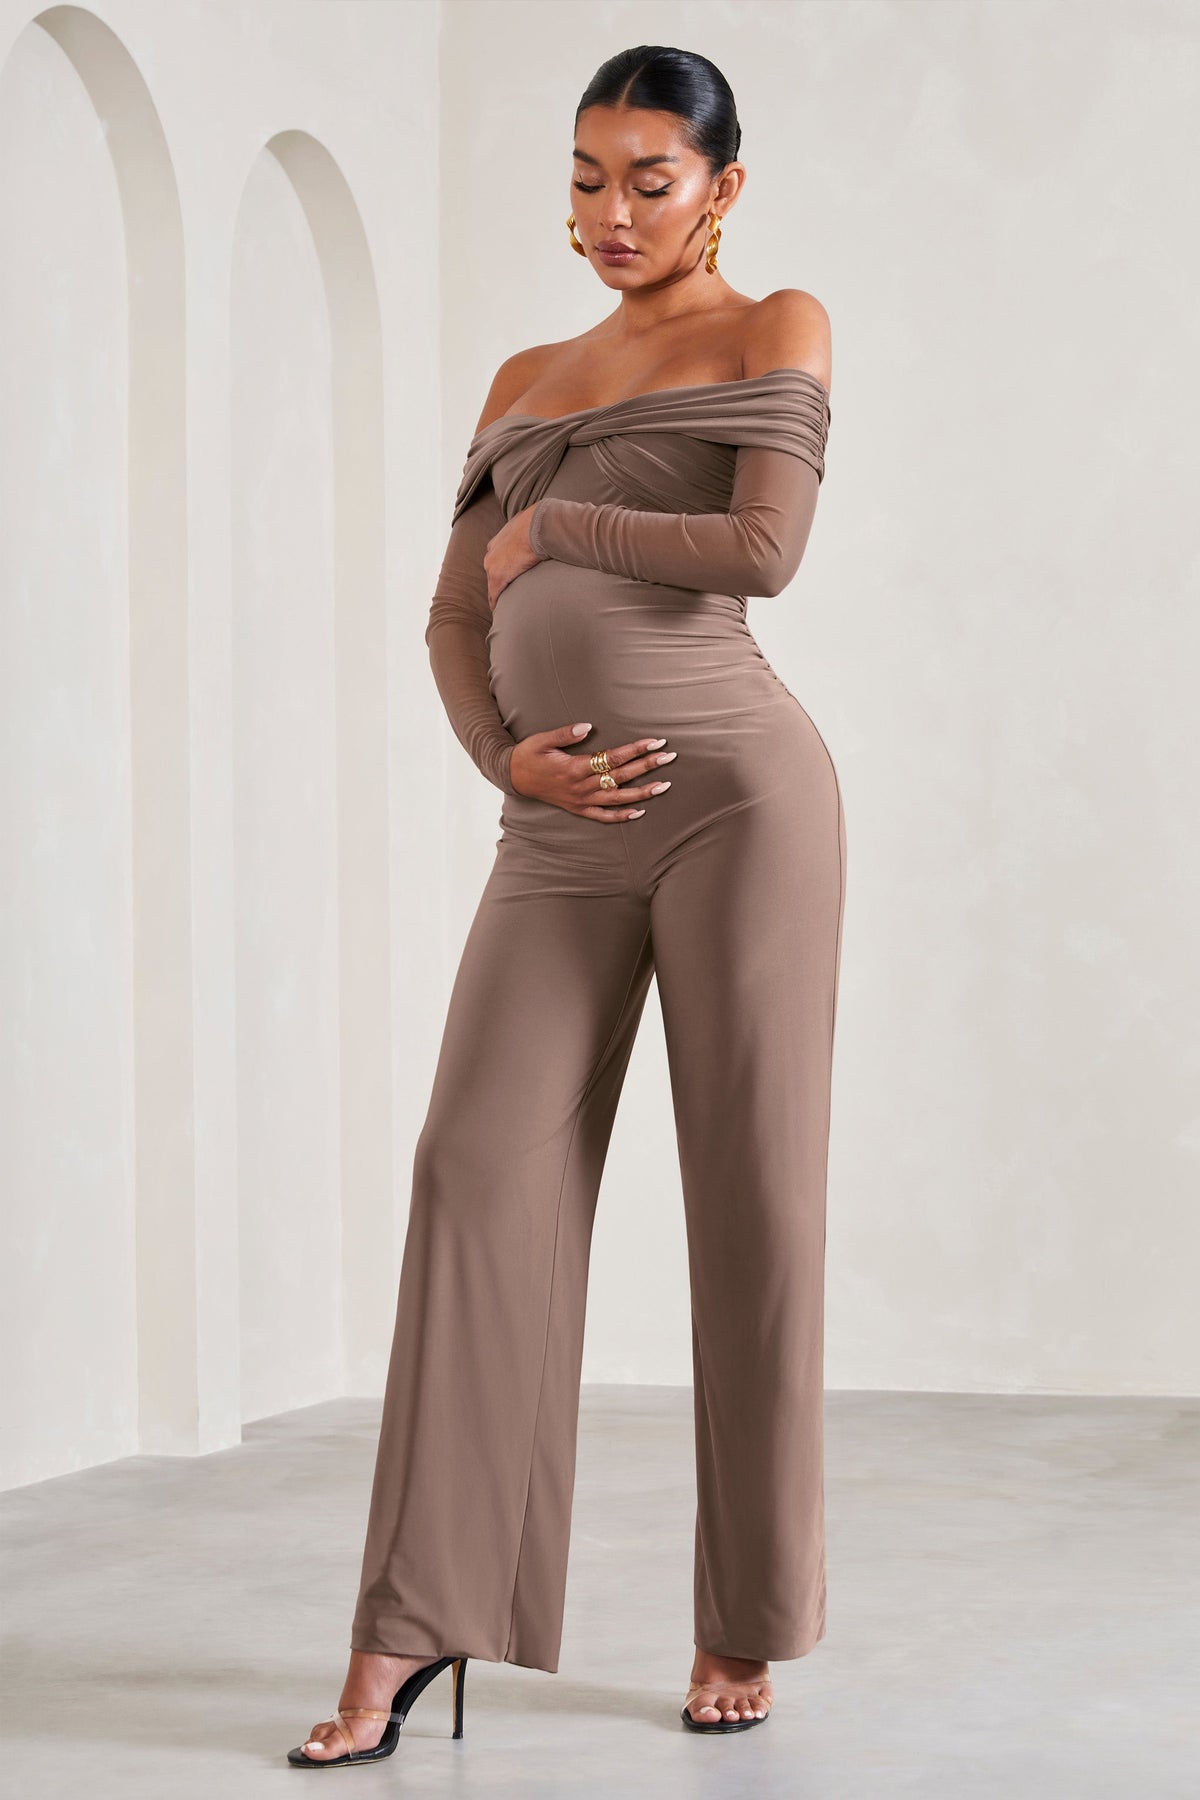 Count Down Powder Blue Maternity Ruched Mesh Bardot Jumpsuit